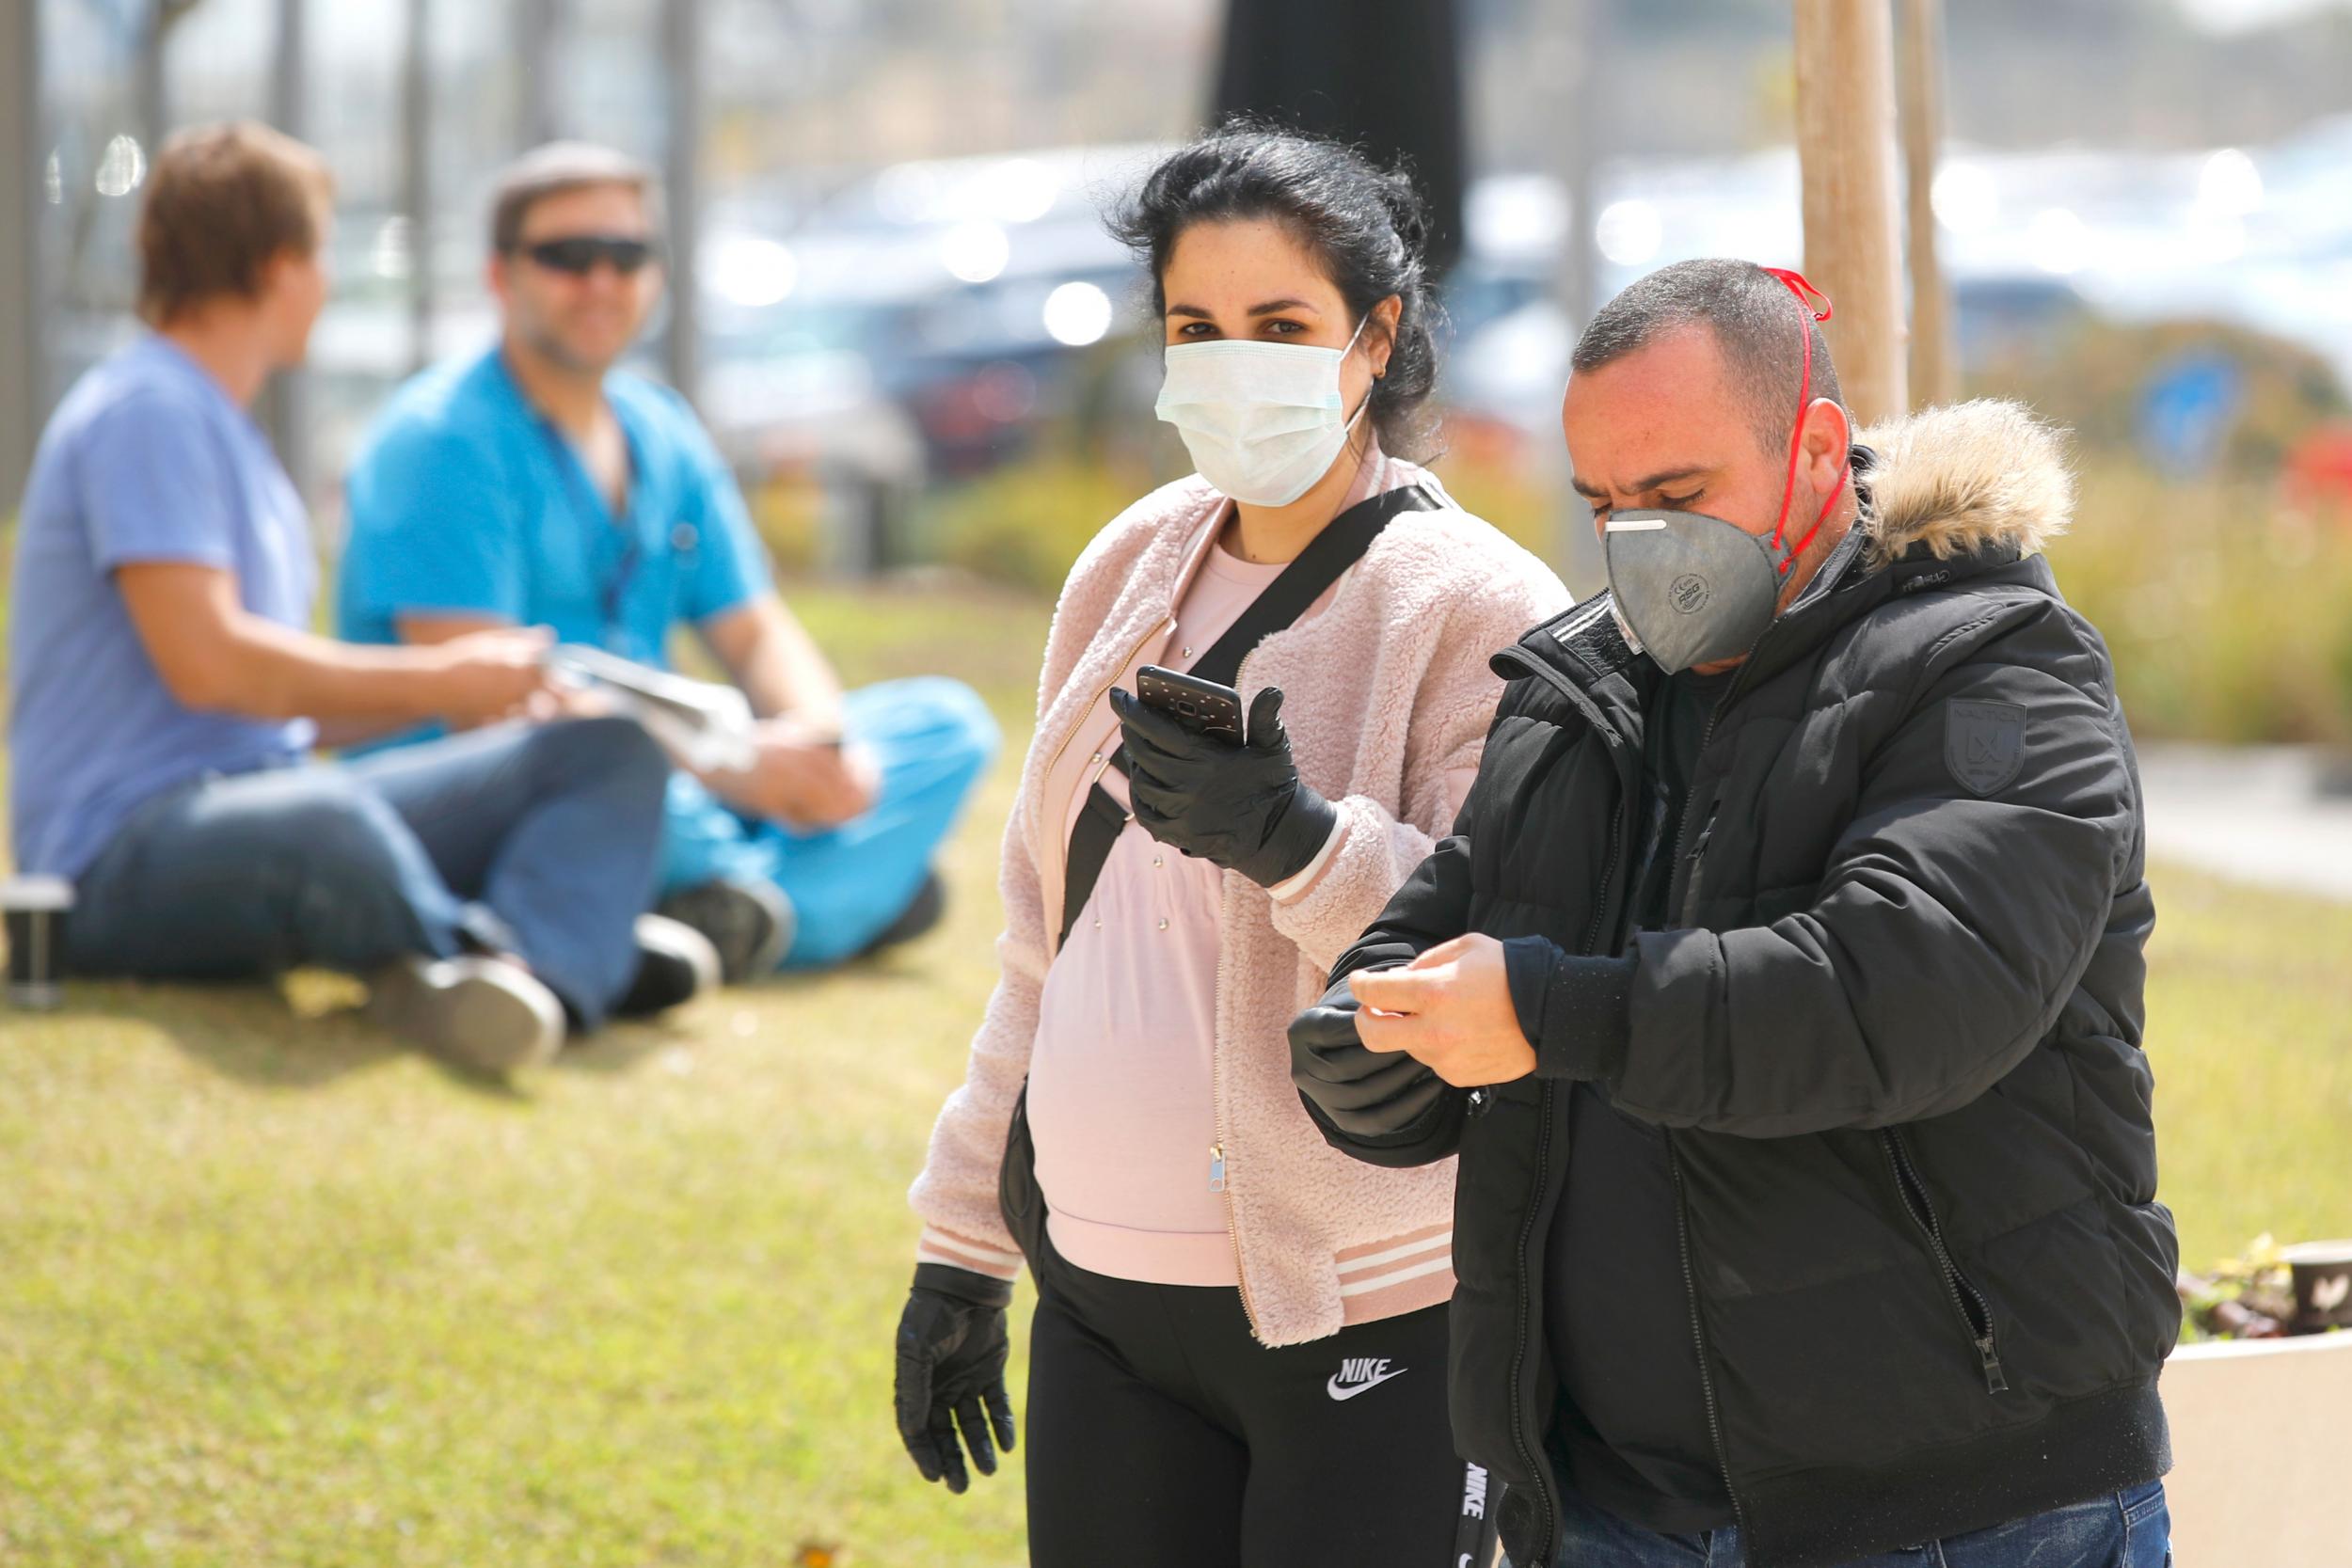 People wearing protective masks walk in the southern Israeli city of Ashdod, as the Jewish state introduces stringent measures to control the coronavirus pandemic